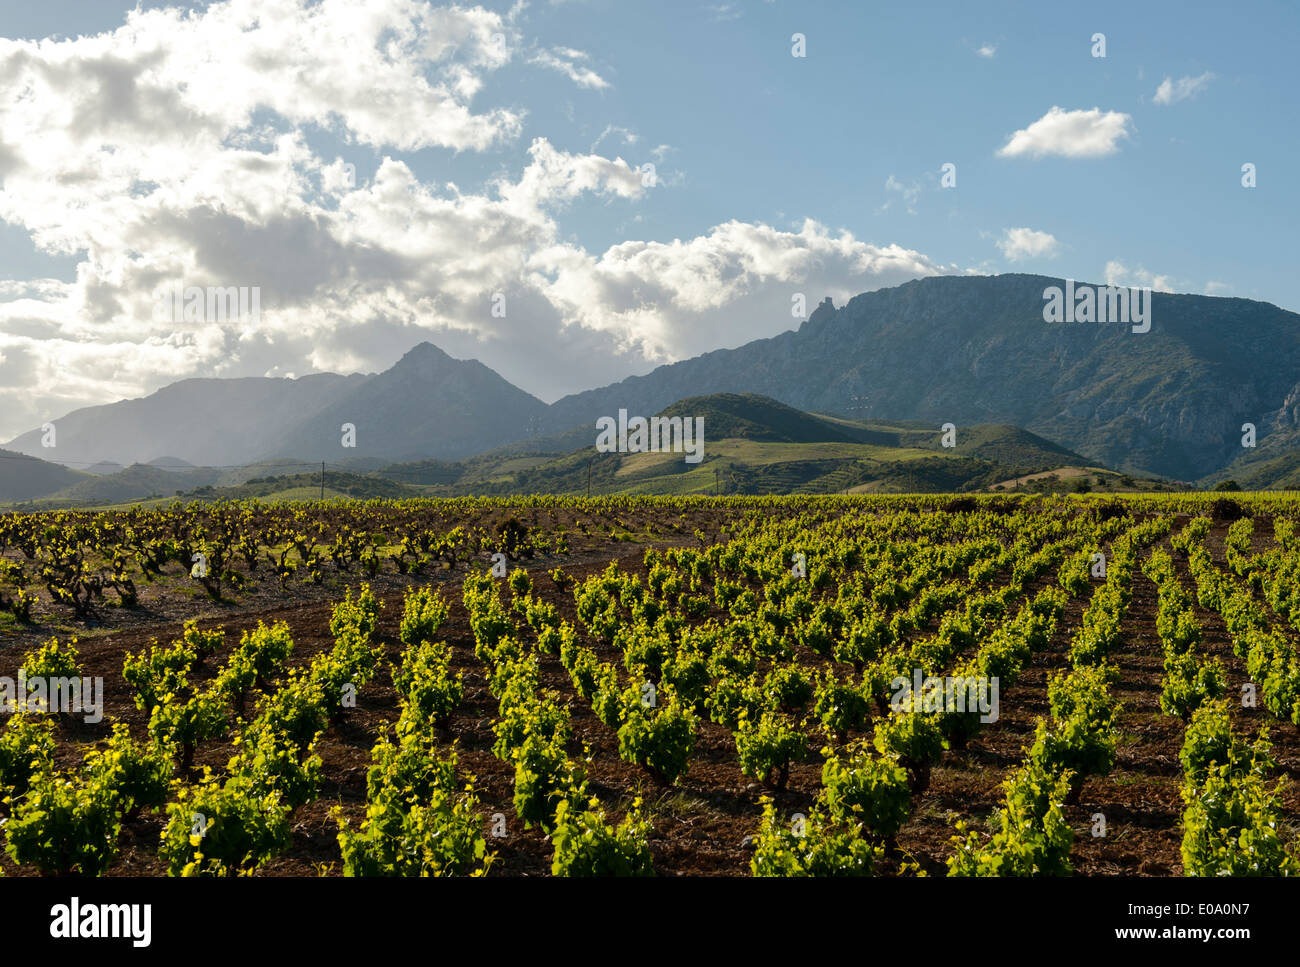 Old vineyard at Maury, AOC winemaking valley in the Fenouillèdes, Languedoc-Roussillon, France Stock Photo